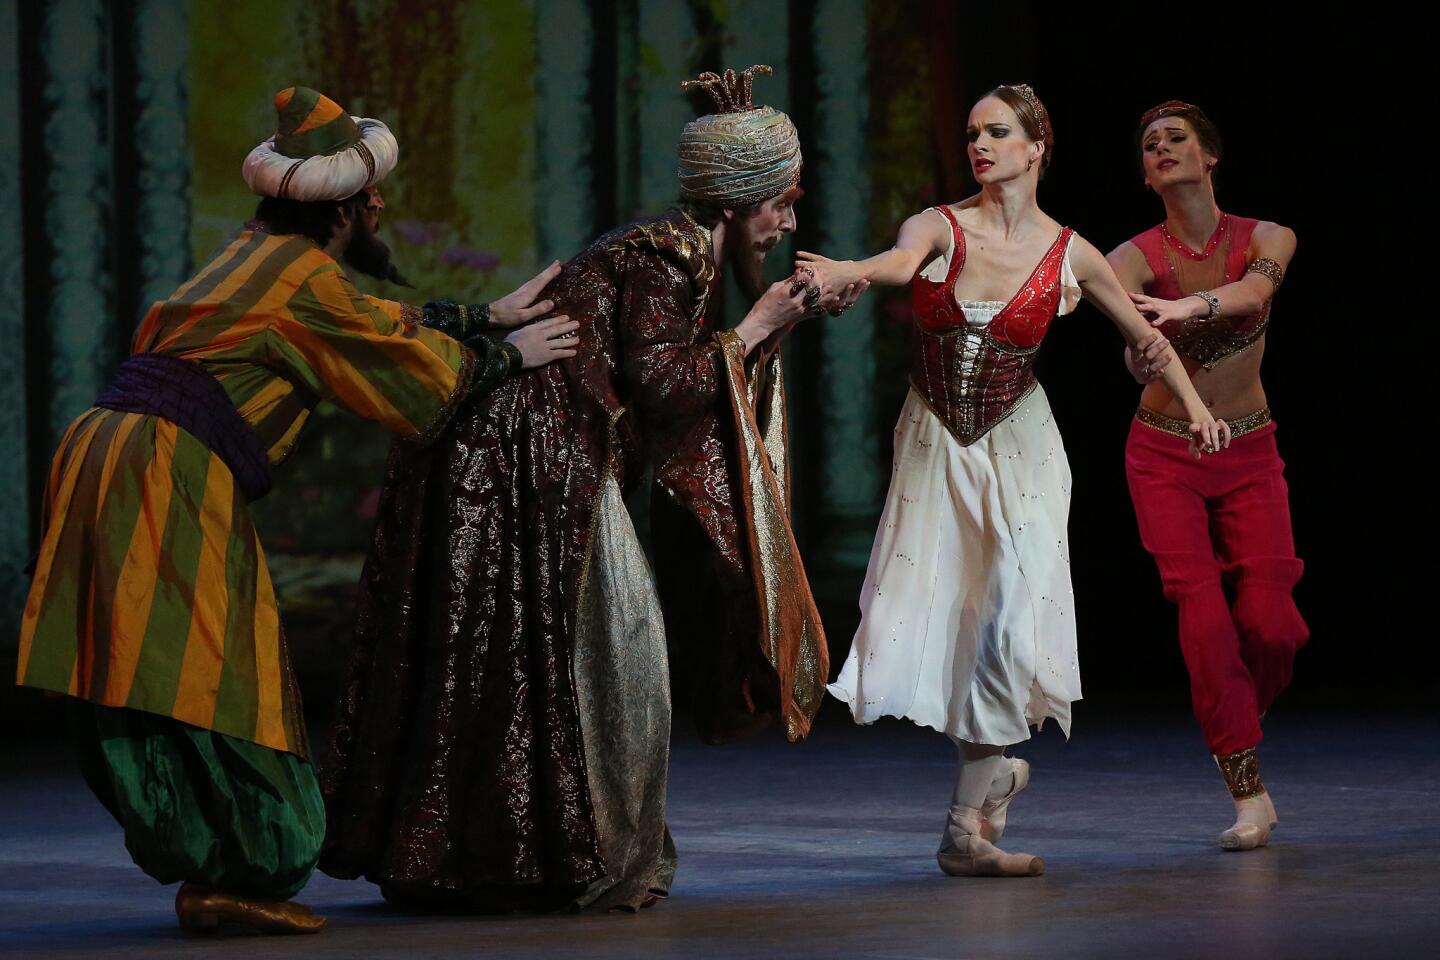 Alexey Malakhov as Seyd-Pasha, second from left, tries to win the favor of Medora (Ekaterina Borchenko).